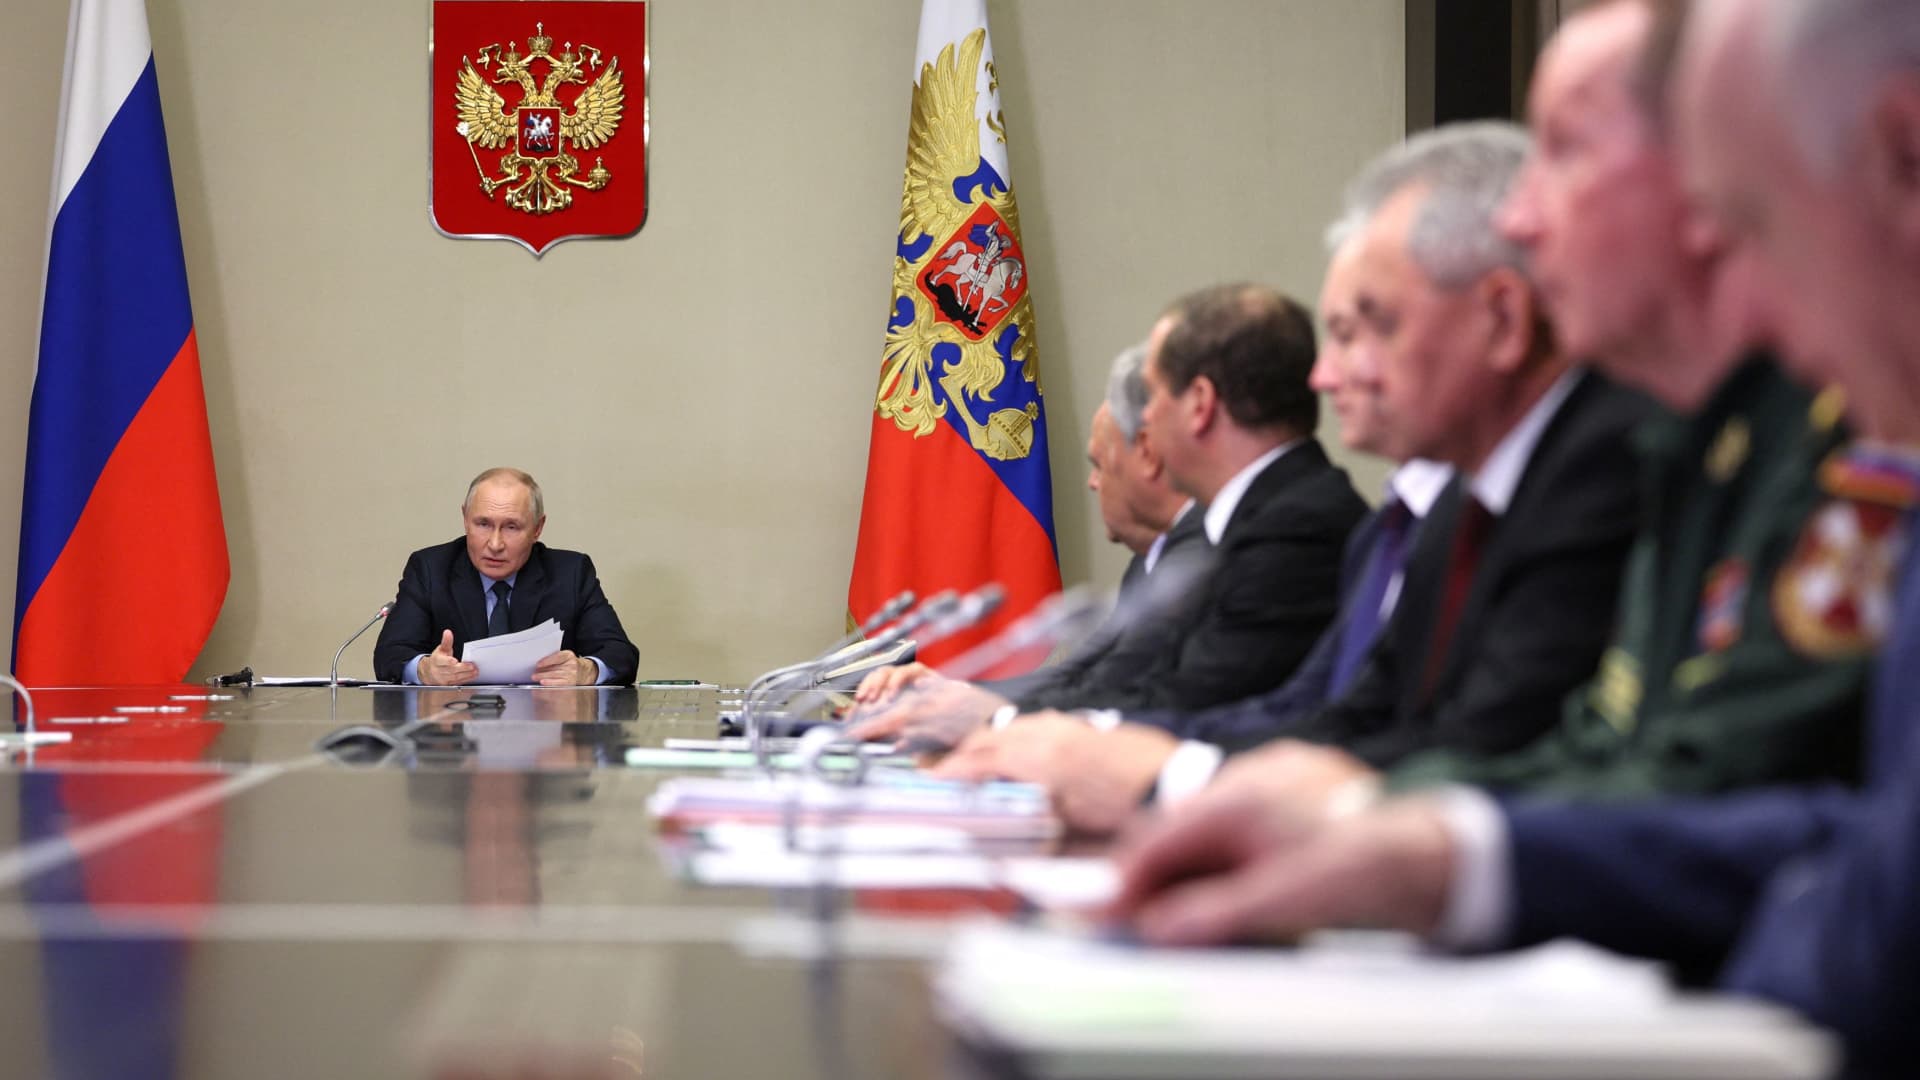 Russian President Vladimir Putin chairs a meeting of members of his Security Council and the government and the heads of law enforcement agencies, at the Novo-Ogaryovo state residence outside Moscow, Russia October 30, 2023. Sputnik/Gavriil Grigorov/Pool via REUTERS ATTENTION EDITORS - THIS IMAGE WAS PROVIDED BY A THIRD PARTY.